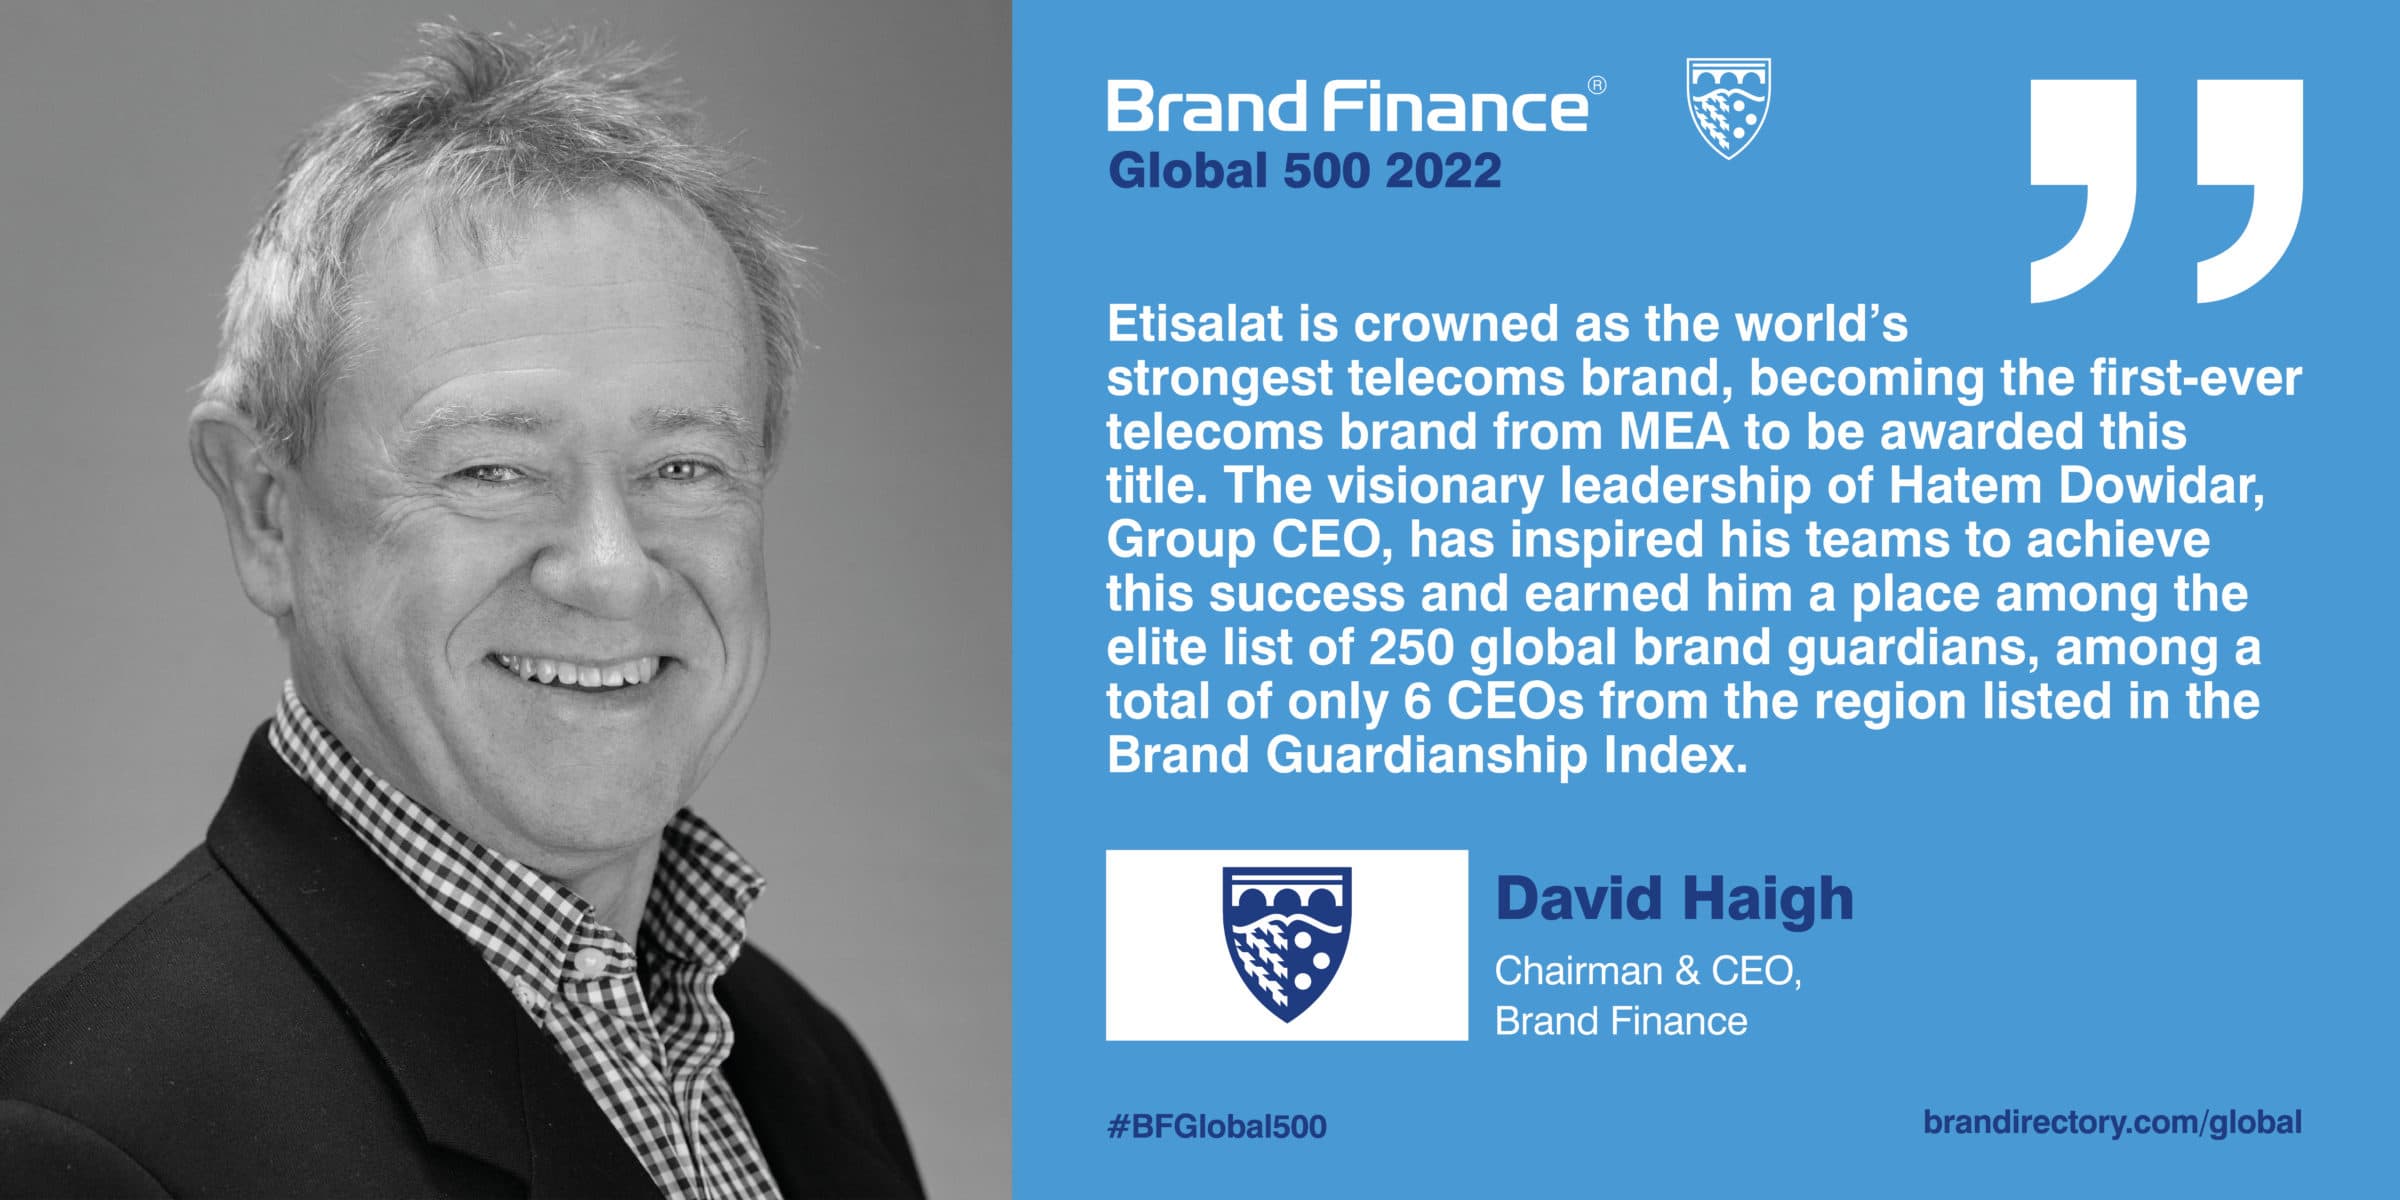 Quote from   David Haigh, CEO & Chairman, Brand Finance